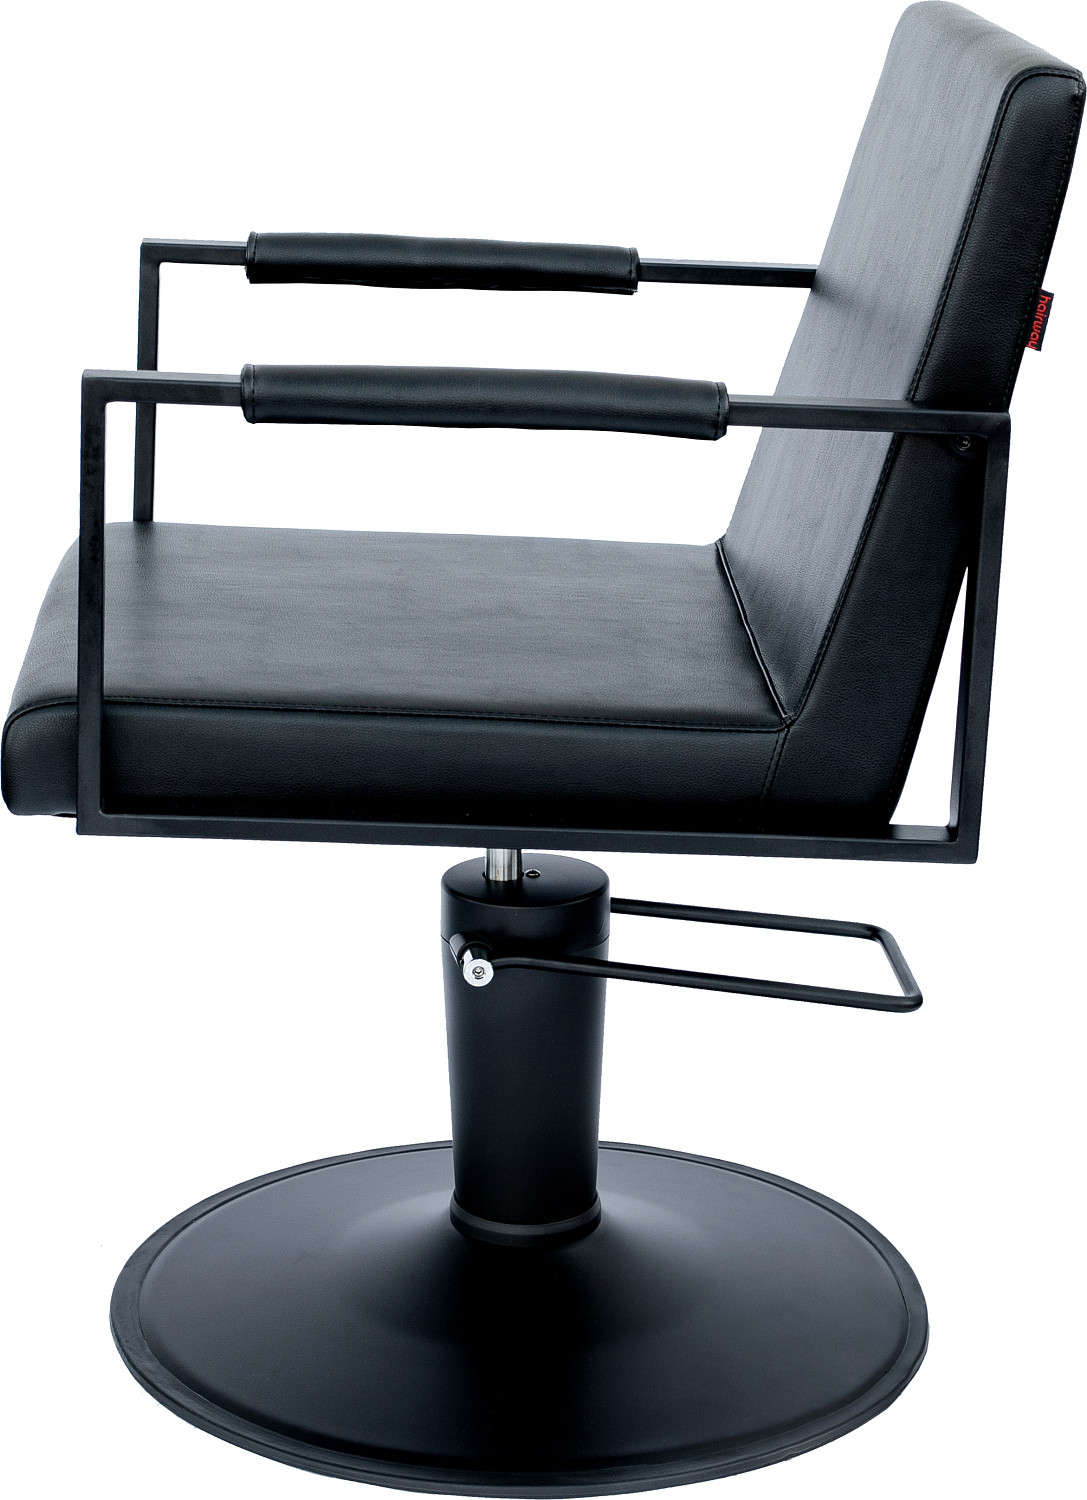  Hairway Styling Chair "John" black with round base 